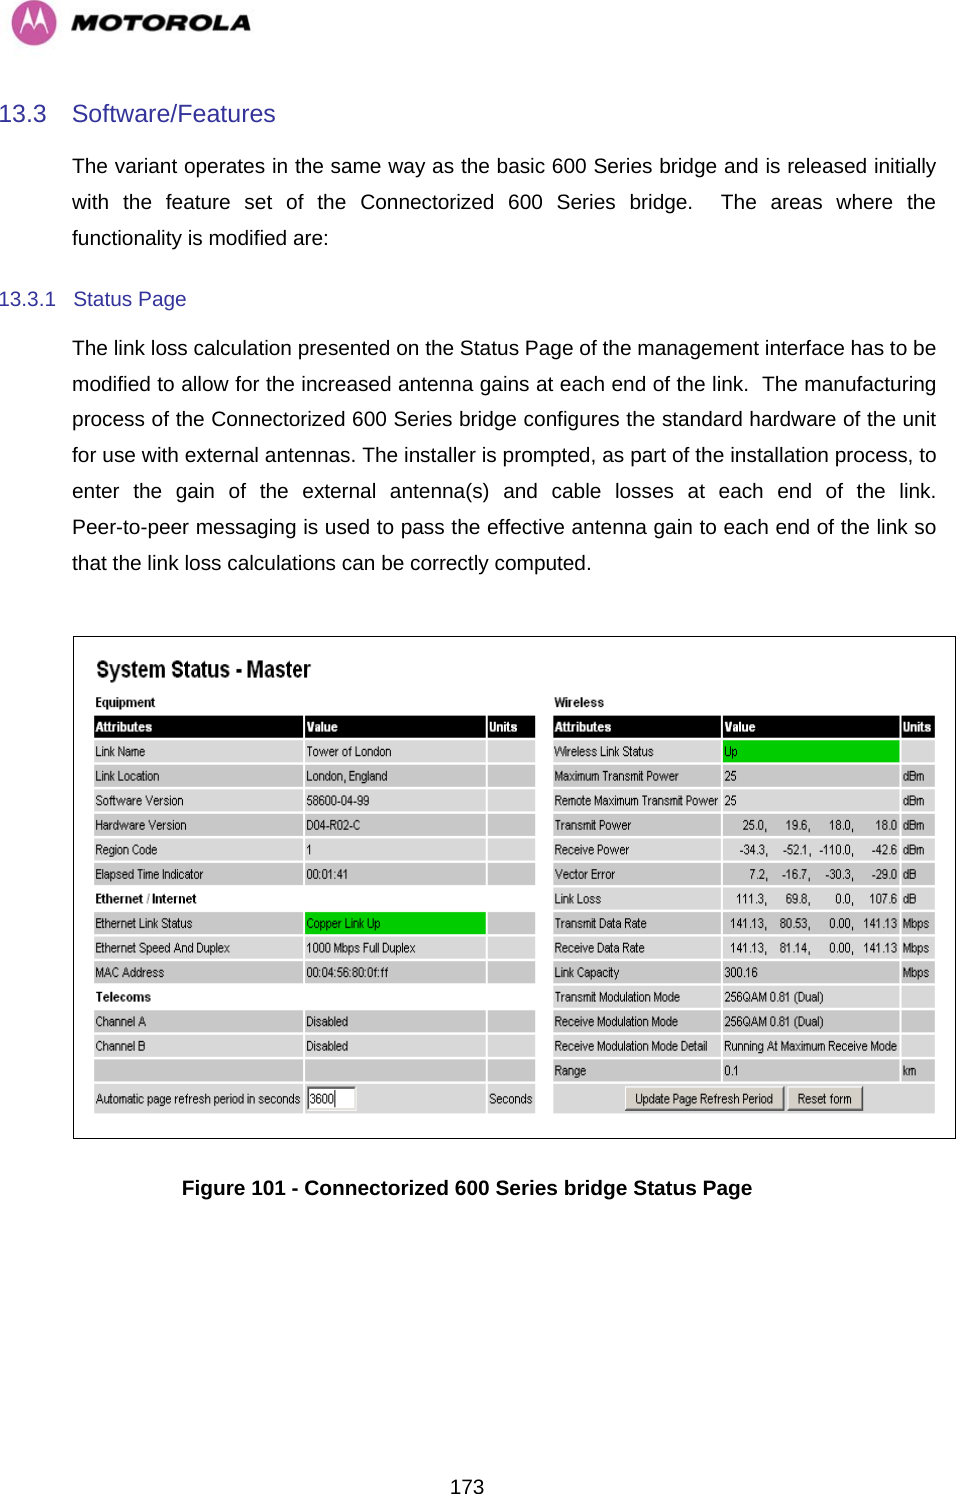   17313.3 Software/Features The variant operates in the same way as the basic 600 Series bridge and is released initially with the feature set of the Connectorized 600 Series bridge.  The areas where the functionality is modified are: 13.3.1 Status Page The link loss calculation presented on the Status Page of the management interface has to be modified to allow for the increased antenna gains at each end of the link.  The manufacturing process of the Connectorized 600 Series bridge configures the standard hardware of the unit for use with external antennas. The installer is prompted, as part of the installation process, to enter the gain of the external antenna(s) and cable losses at each end of the link. Peer-to-peer messaging is used to pass the effective antenna gain to each end of the link so that the link loss calculations can be correctly computed.   Figure 101 - Connectorized 600 Series bridge Status Page 